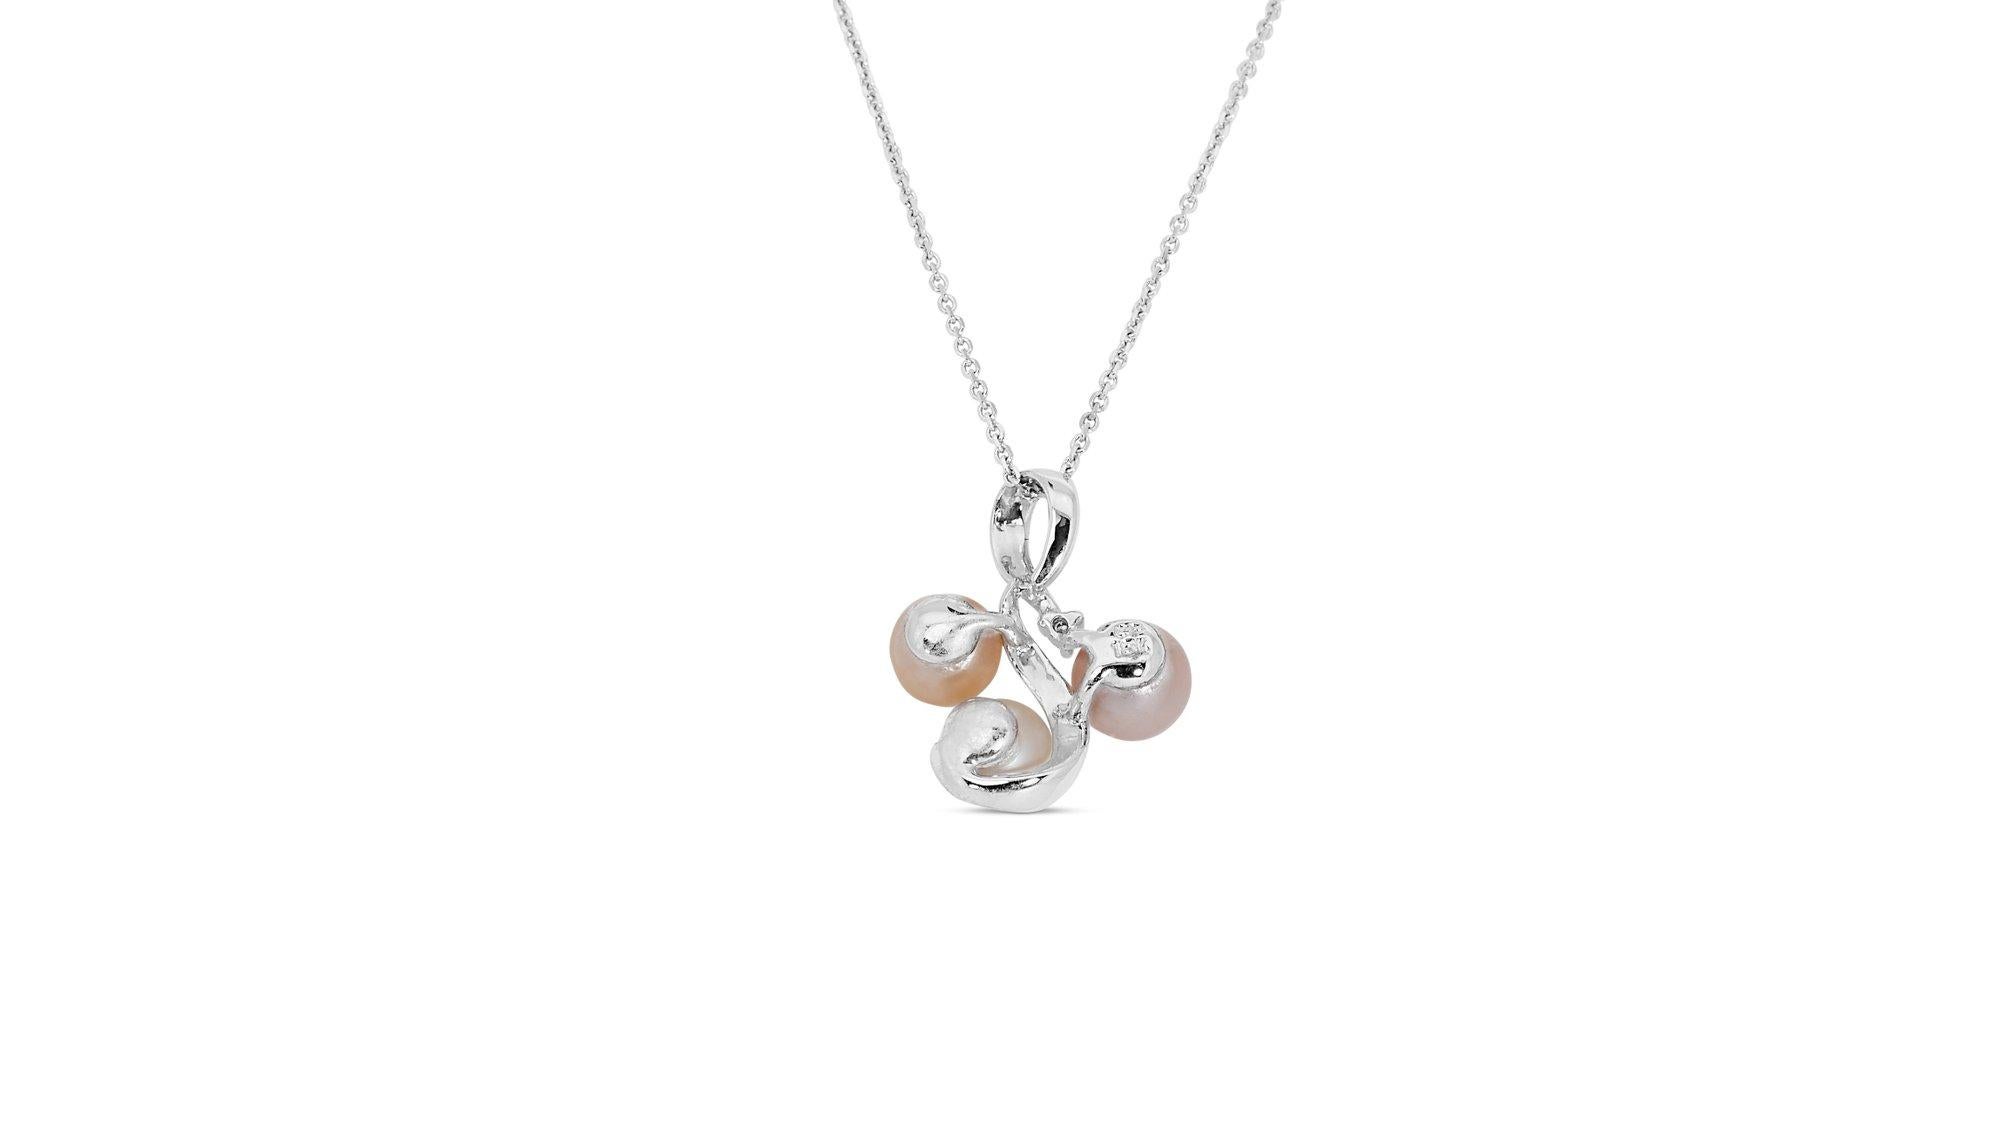 A simple yet elegant necklace with a pendant with a dazzling 0.01 carat round brilliant diamond and 3 natural pearls. The jewelry is made of 18K White Gold with a high-quality polish. It comes with an AIG certificate and a nice jewelry box.

1